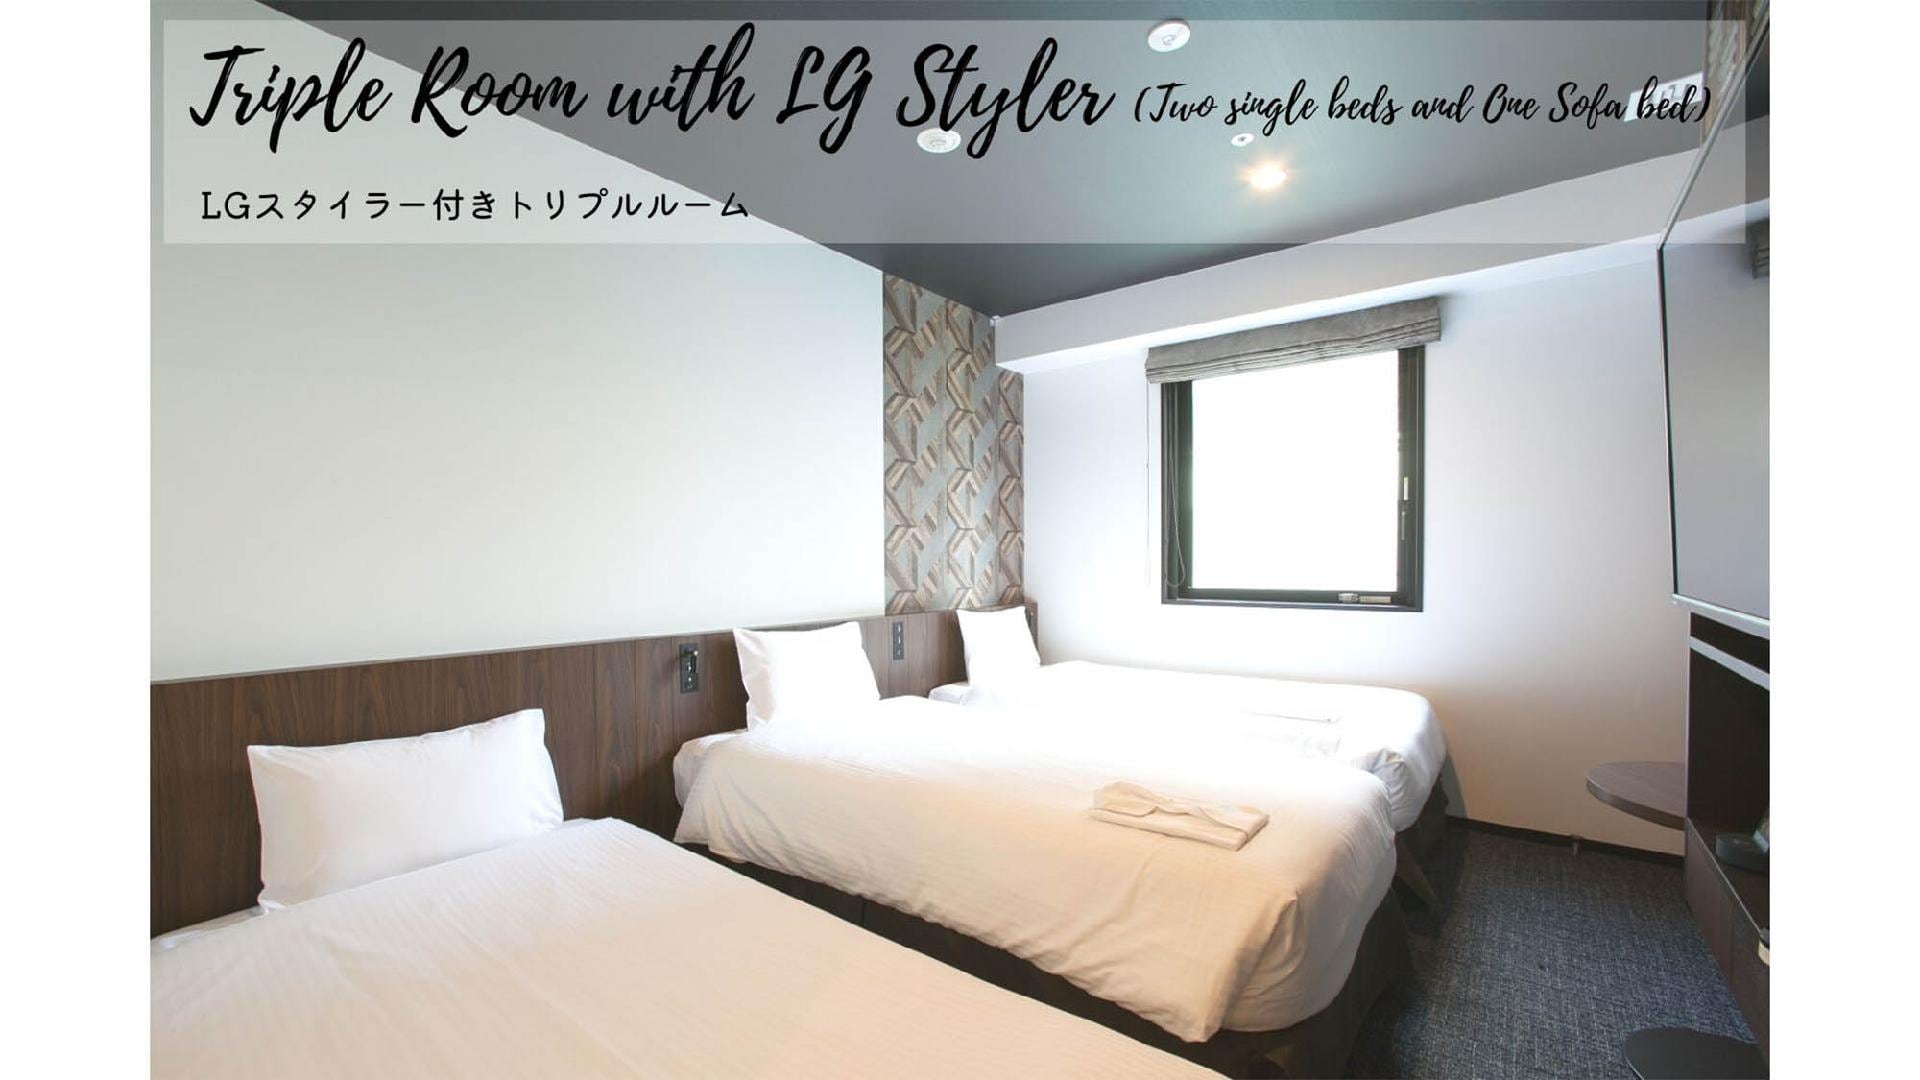 Triple room with LG styler